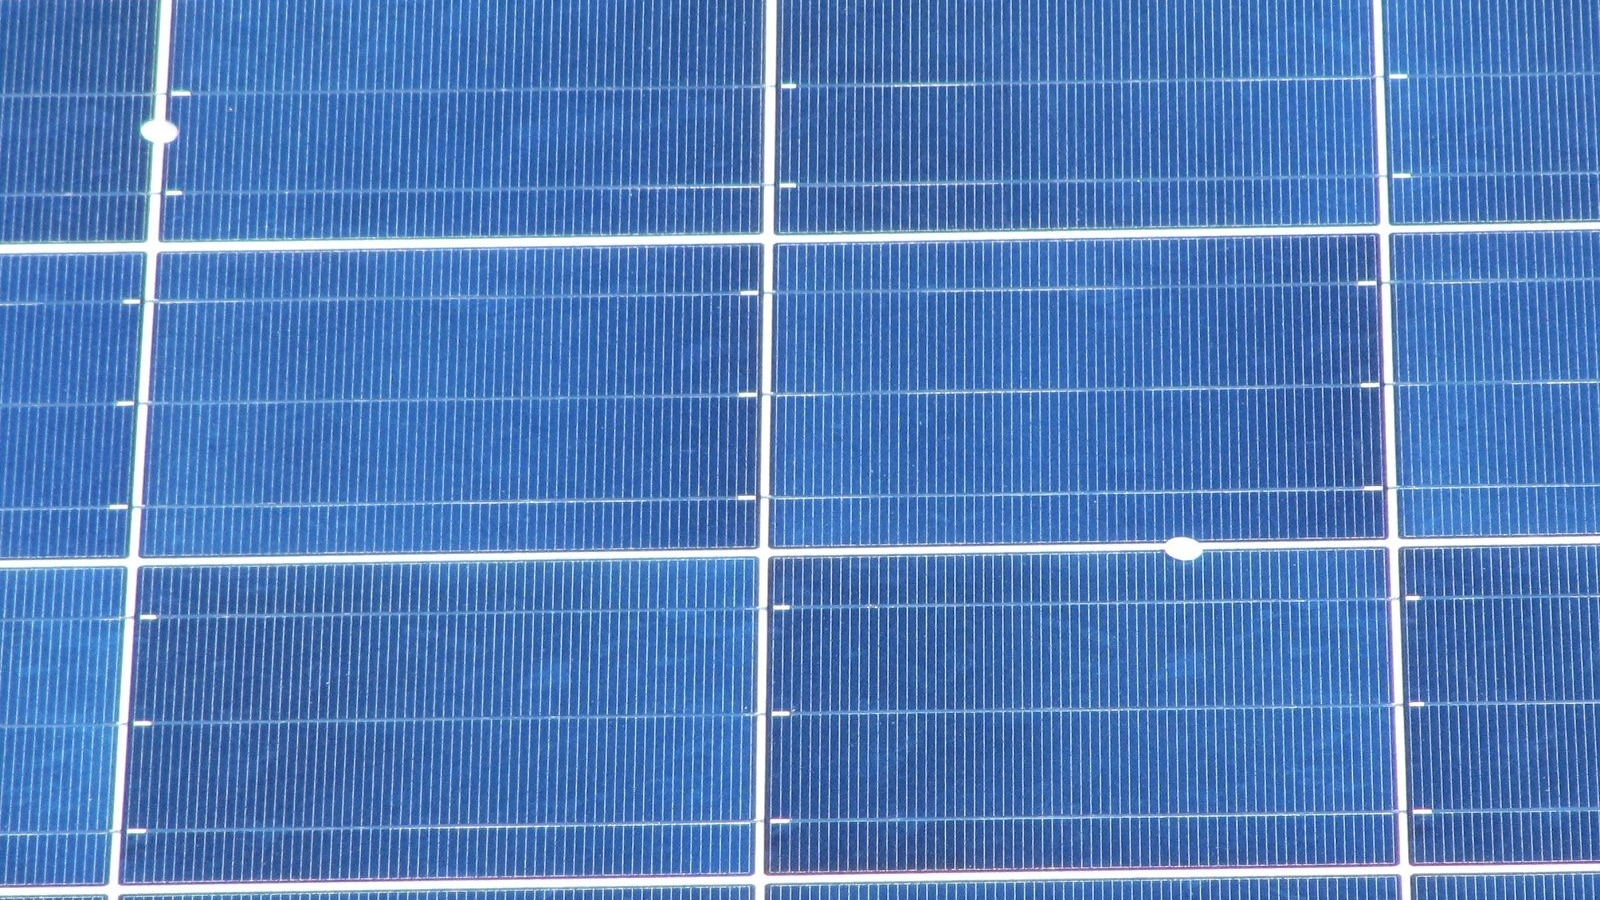 Photovoltaic solar power field at Volkswagen plant in Chattanooga, Tennessee